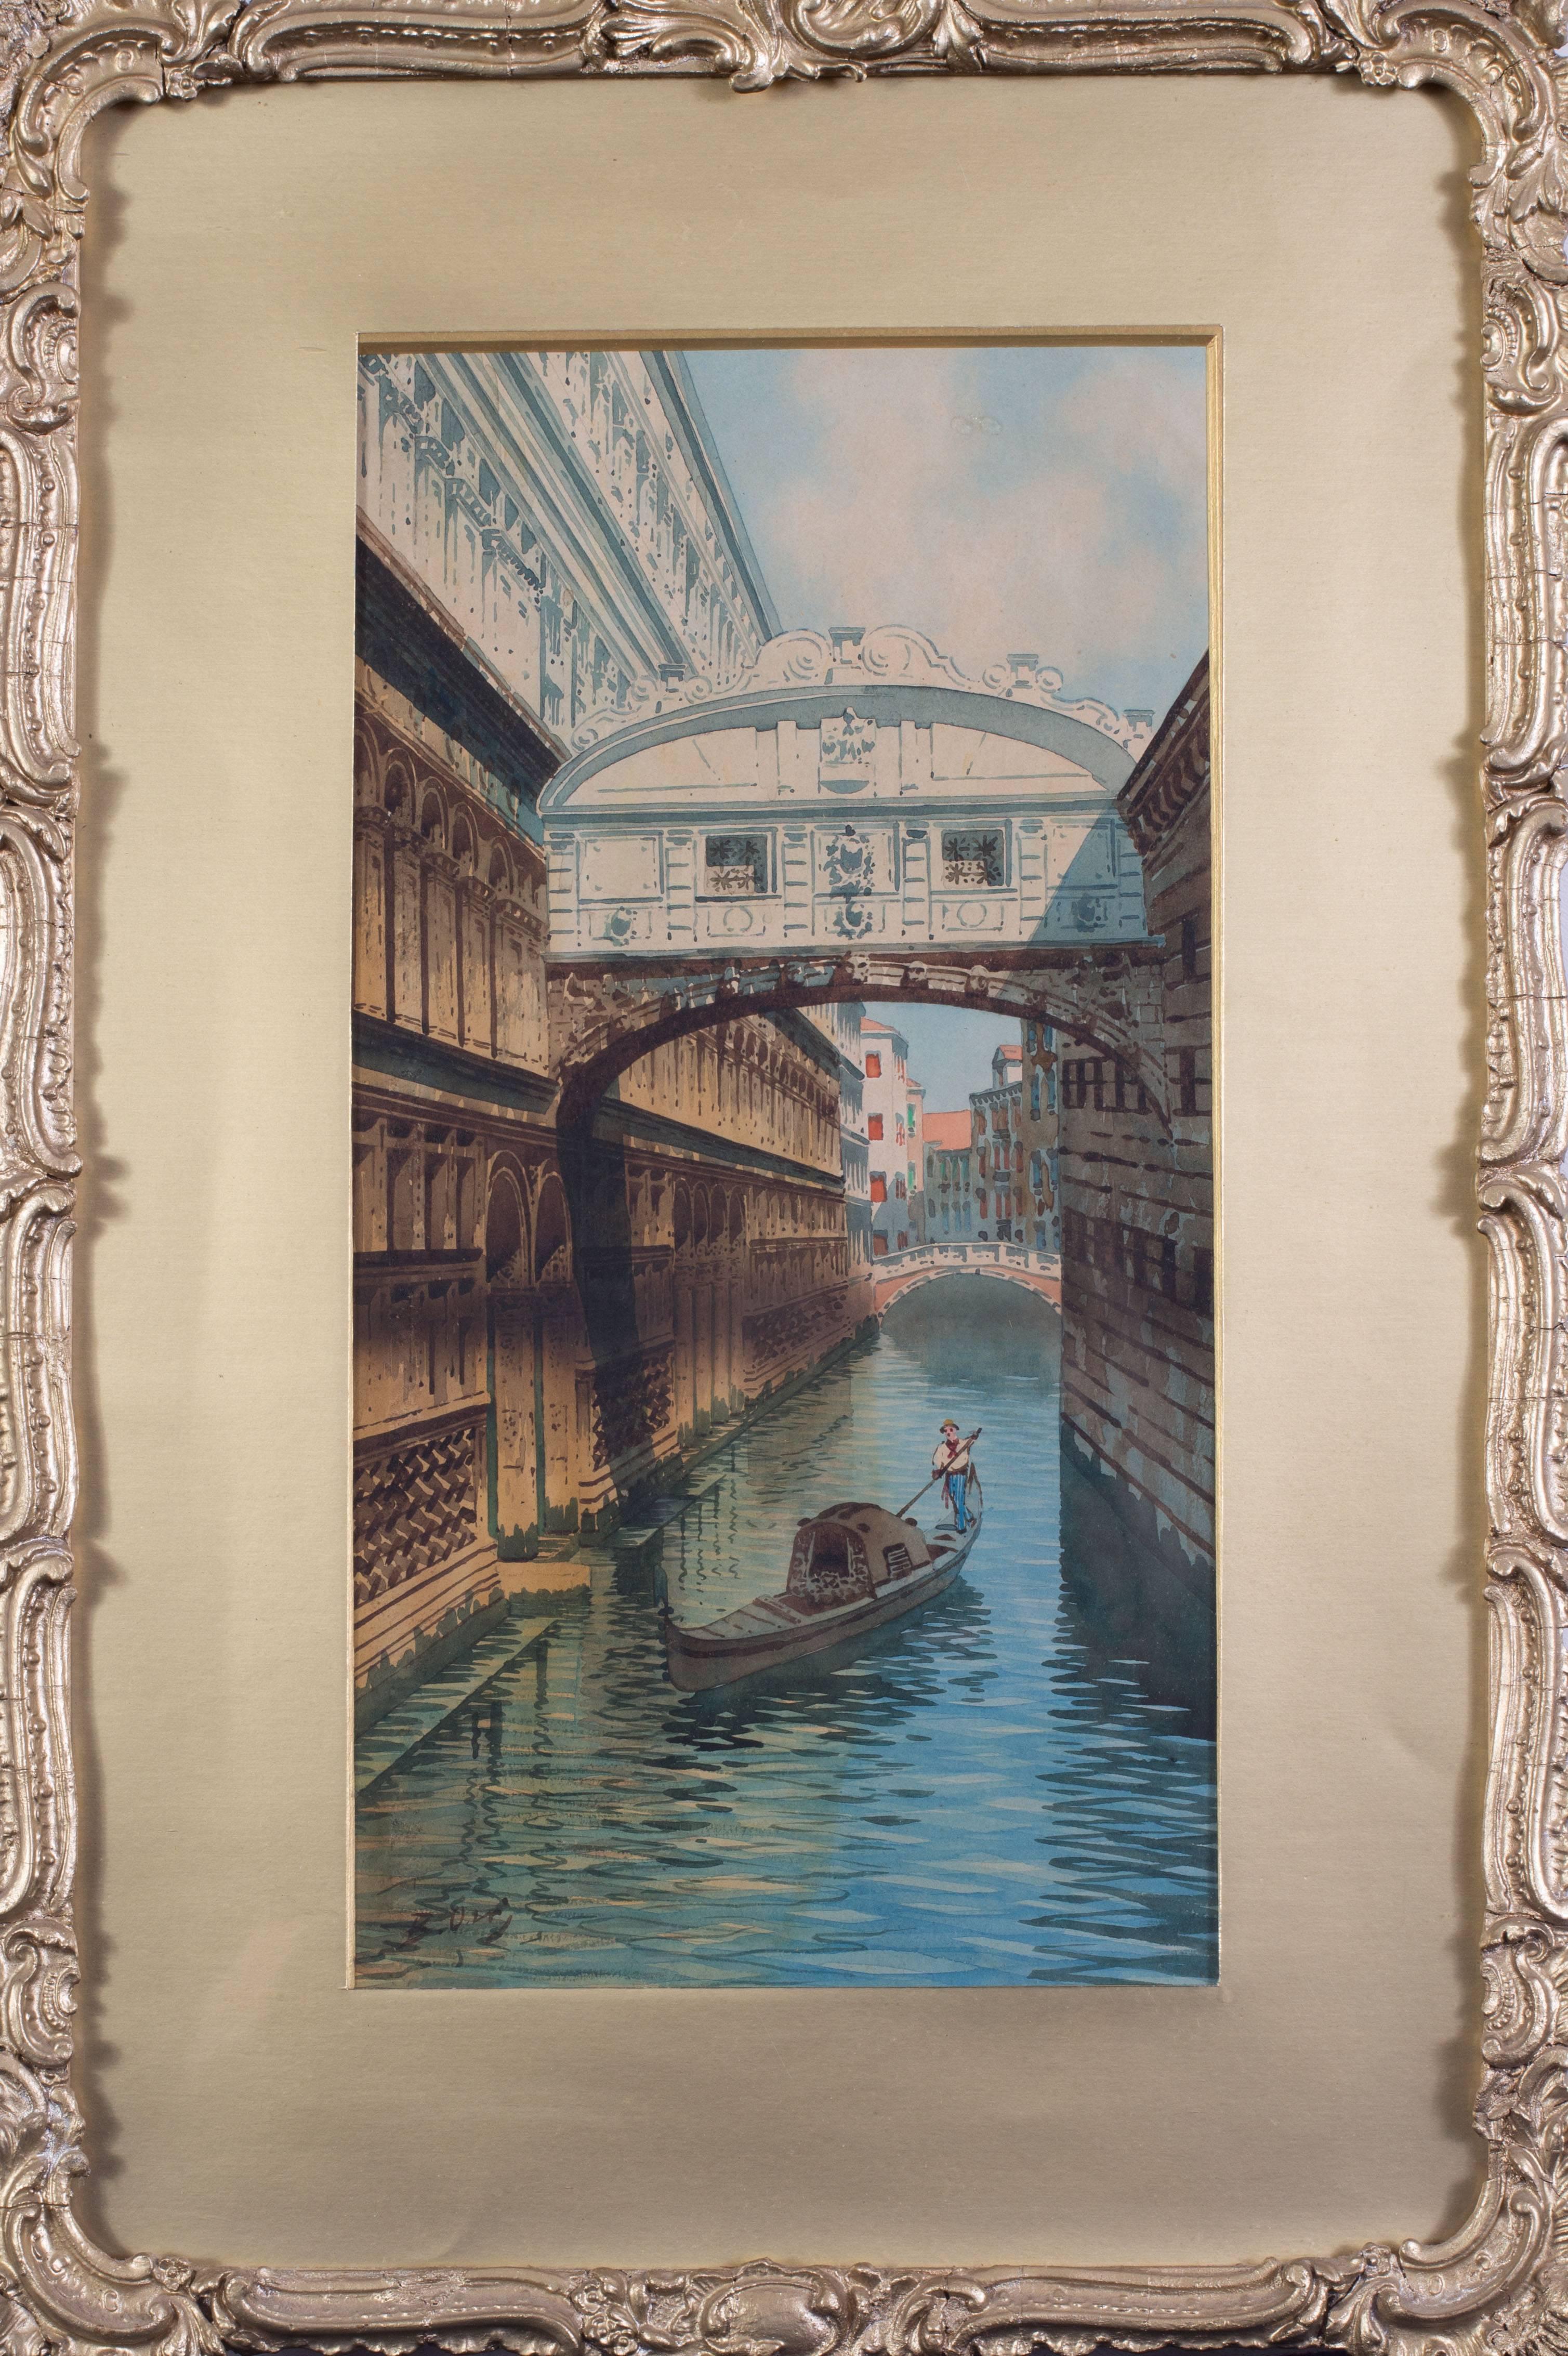 Circle of Alberto Prosdocimi (1852-1955)
St. Mark’s Square, Venice and The Bridge of Sighs (2)
Watercolour on paper
14.1/4 x 7.3/4in. (36.3 x 19.3cm.) (for both)
Both indistinctly signed by different artist’s
